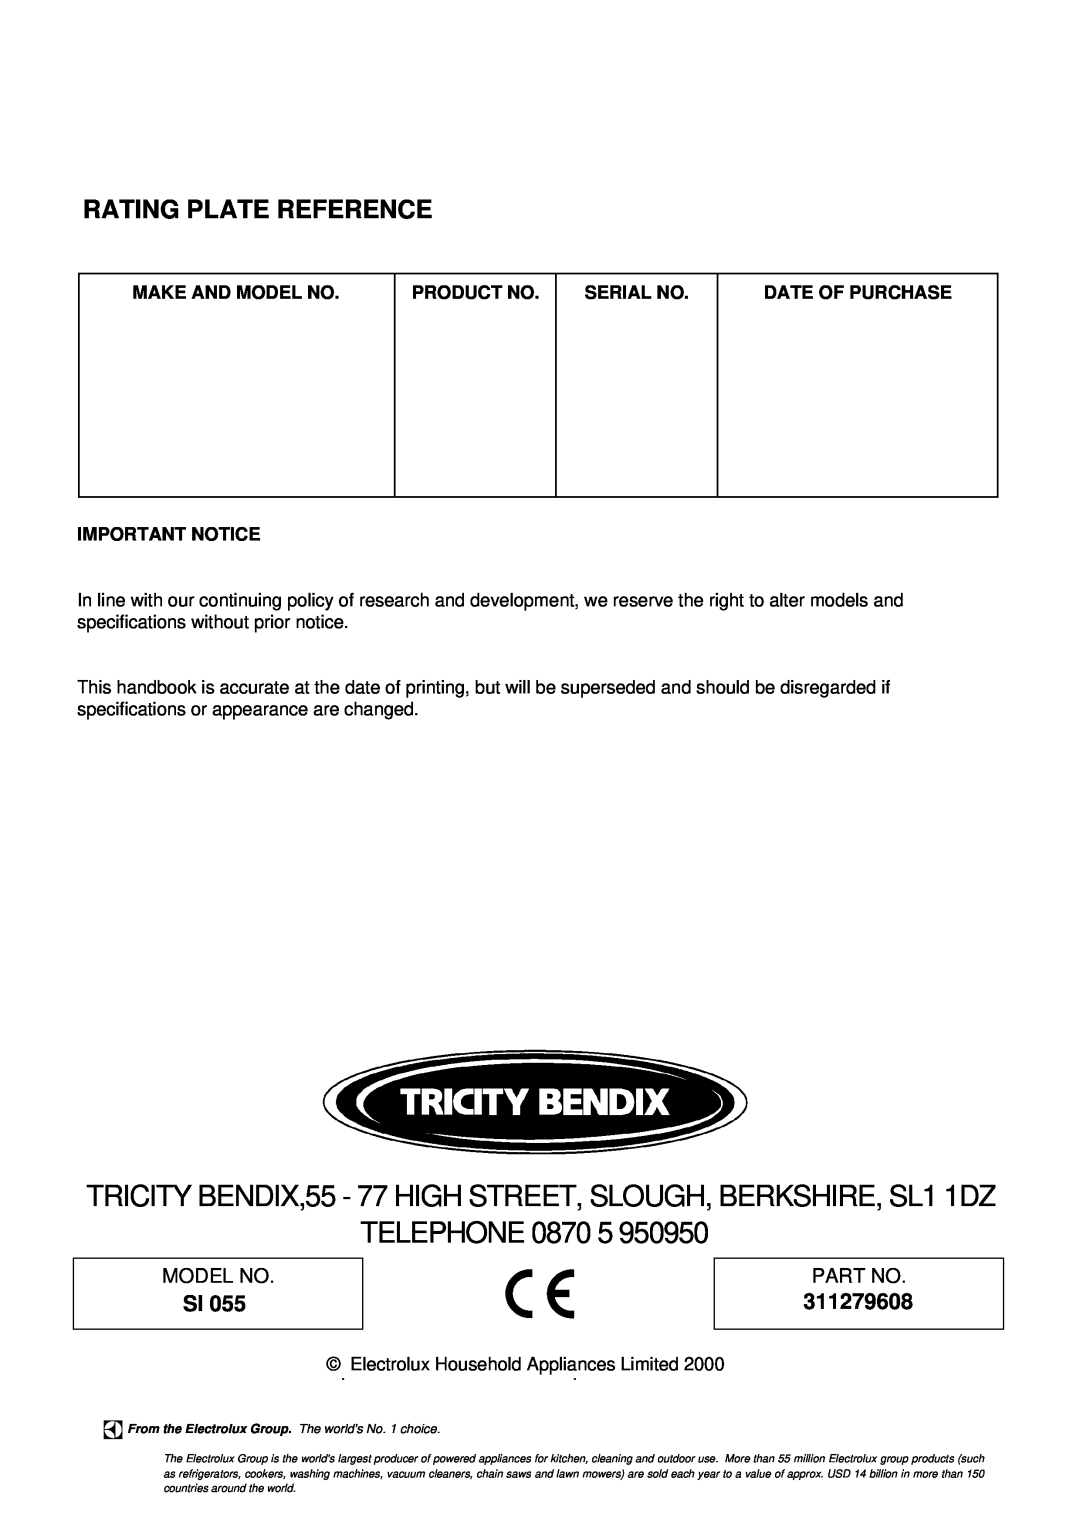 Tricity Bendix SI 055 Rating Plate Reference, 311279608, Telephone, Make And Model No, Product No, Serial No 